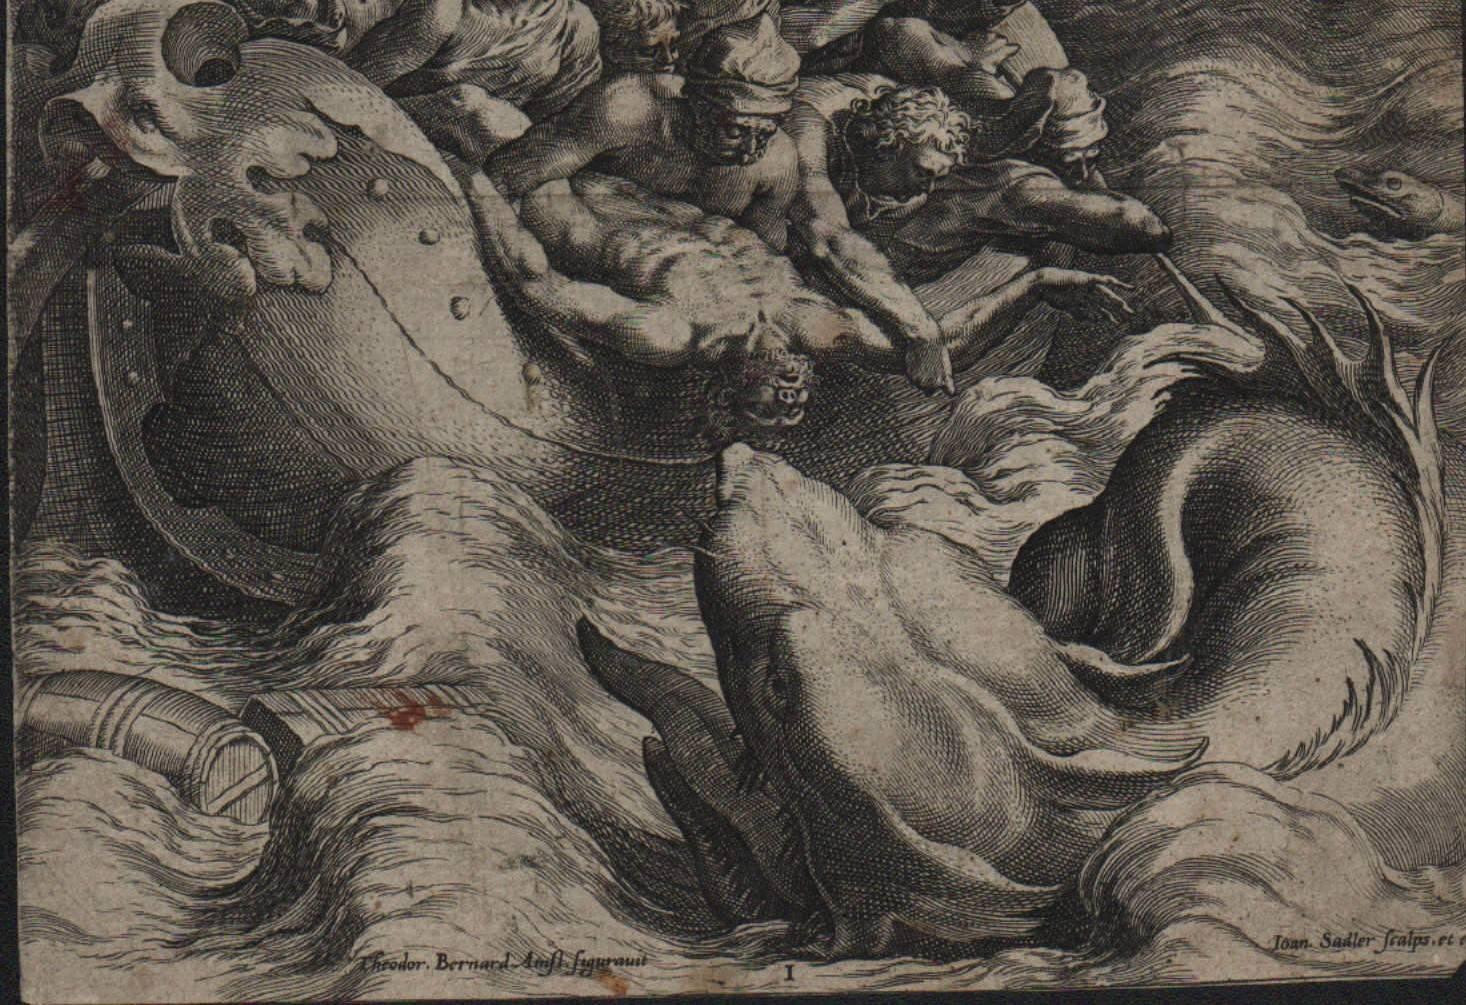 Jonah Thrown Into the Whale - 1582 Old Master Engraving Religious - Print by Johannes Sadeler I